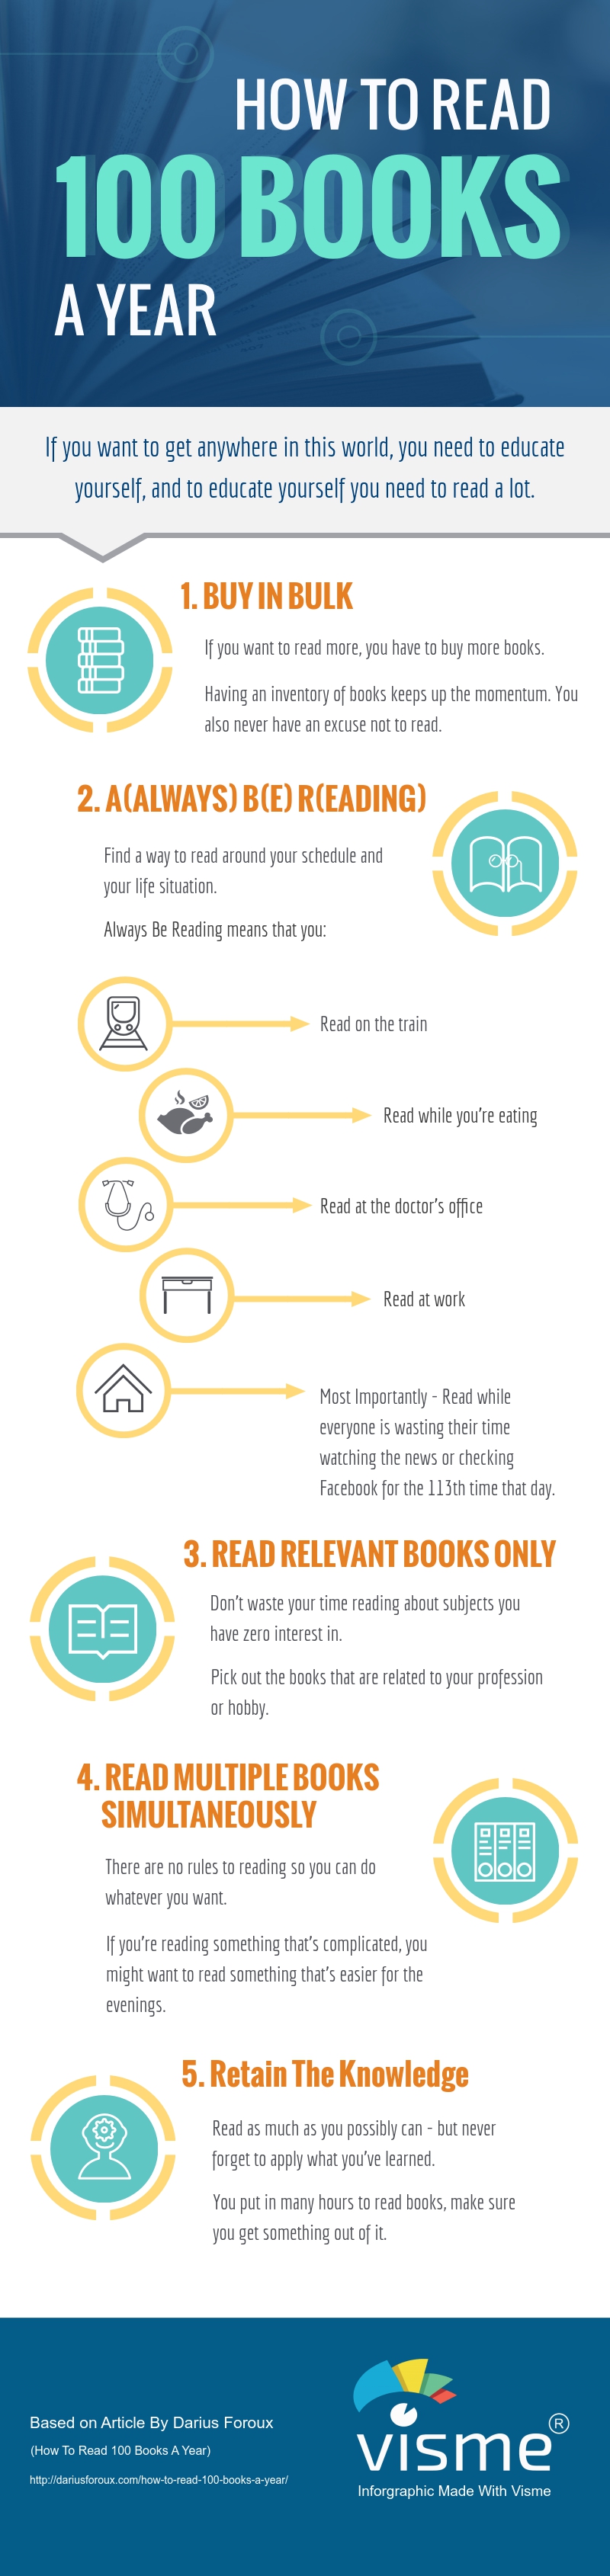 How To Read 100 Books A Year